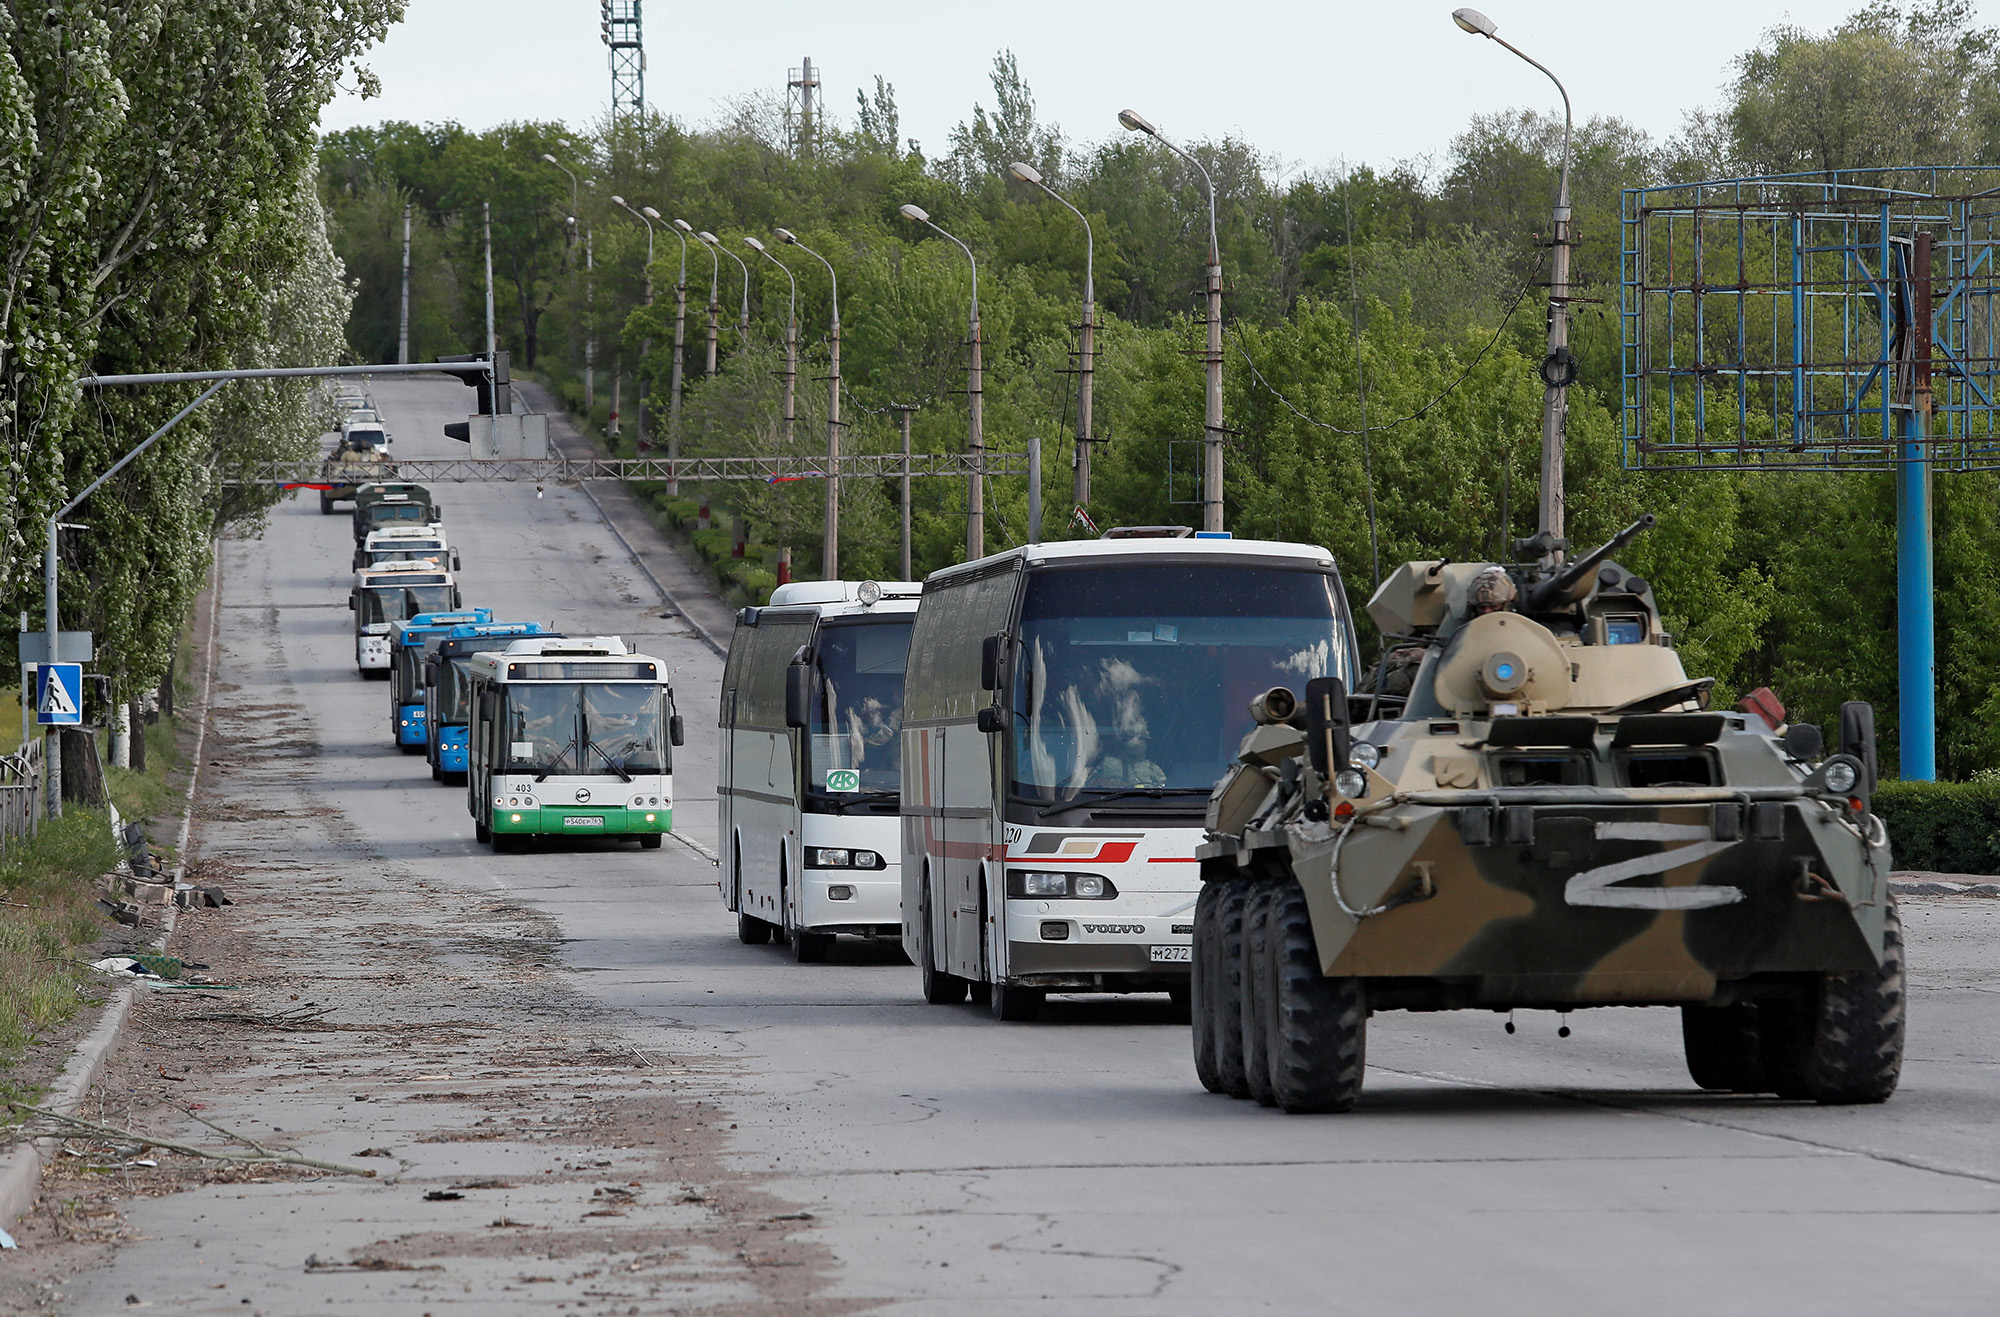 Buses carrying members of Ukrainian forces from the Azovstal steel works drive away under escort of the pro-Russian military in Mariupol, Ukraine, on May 17.